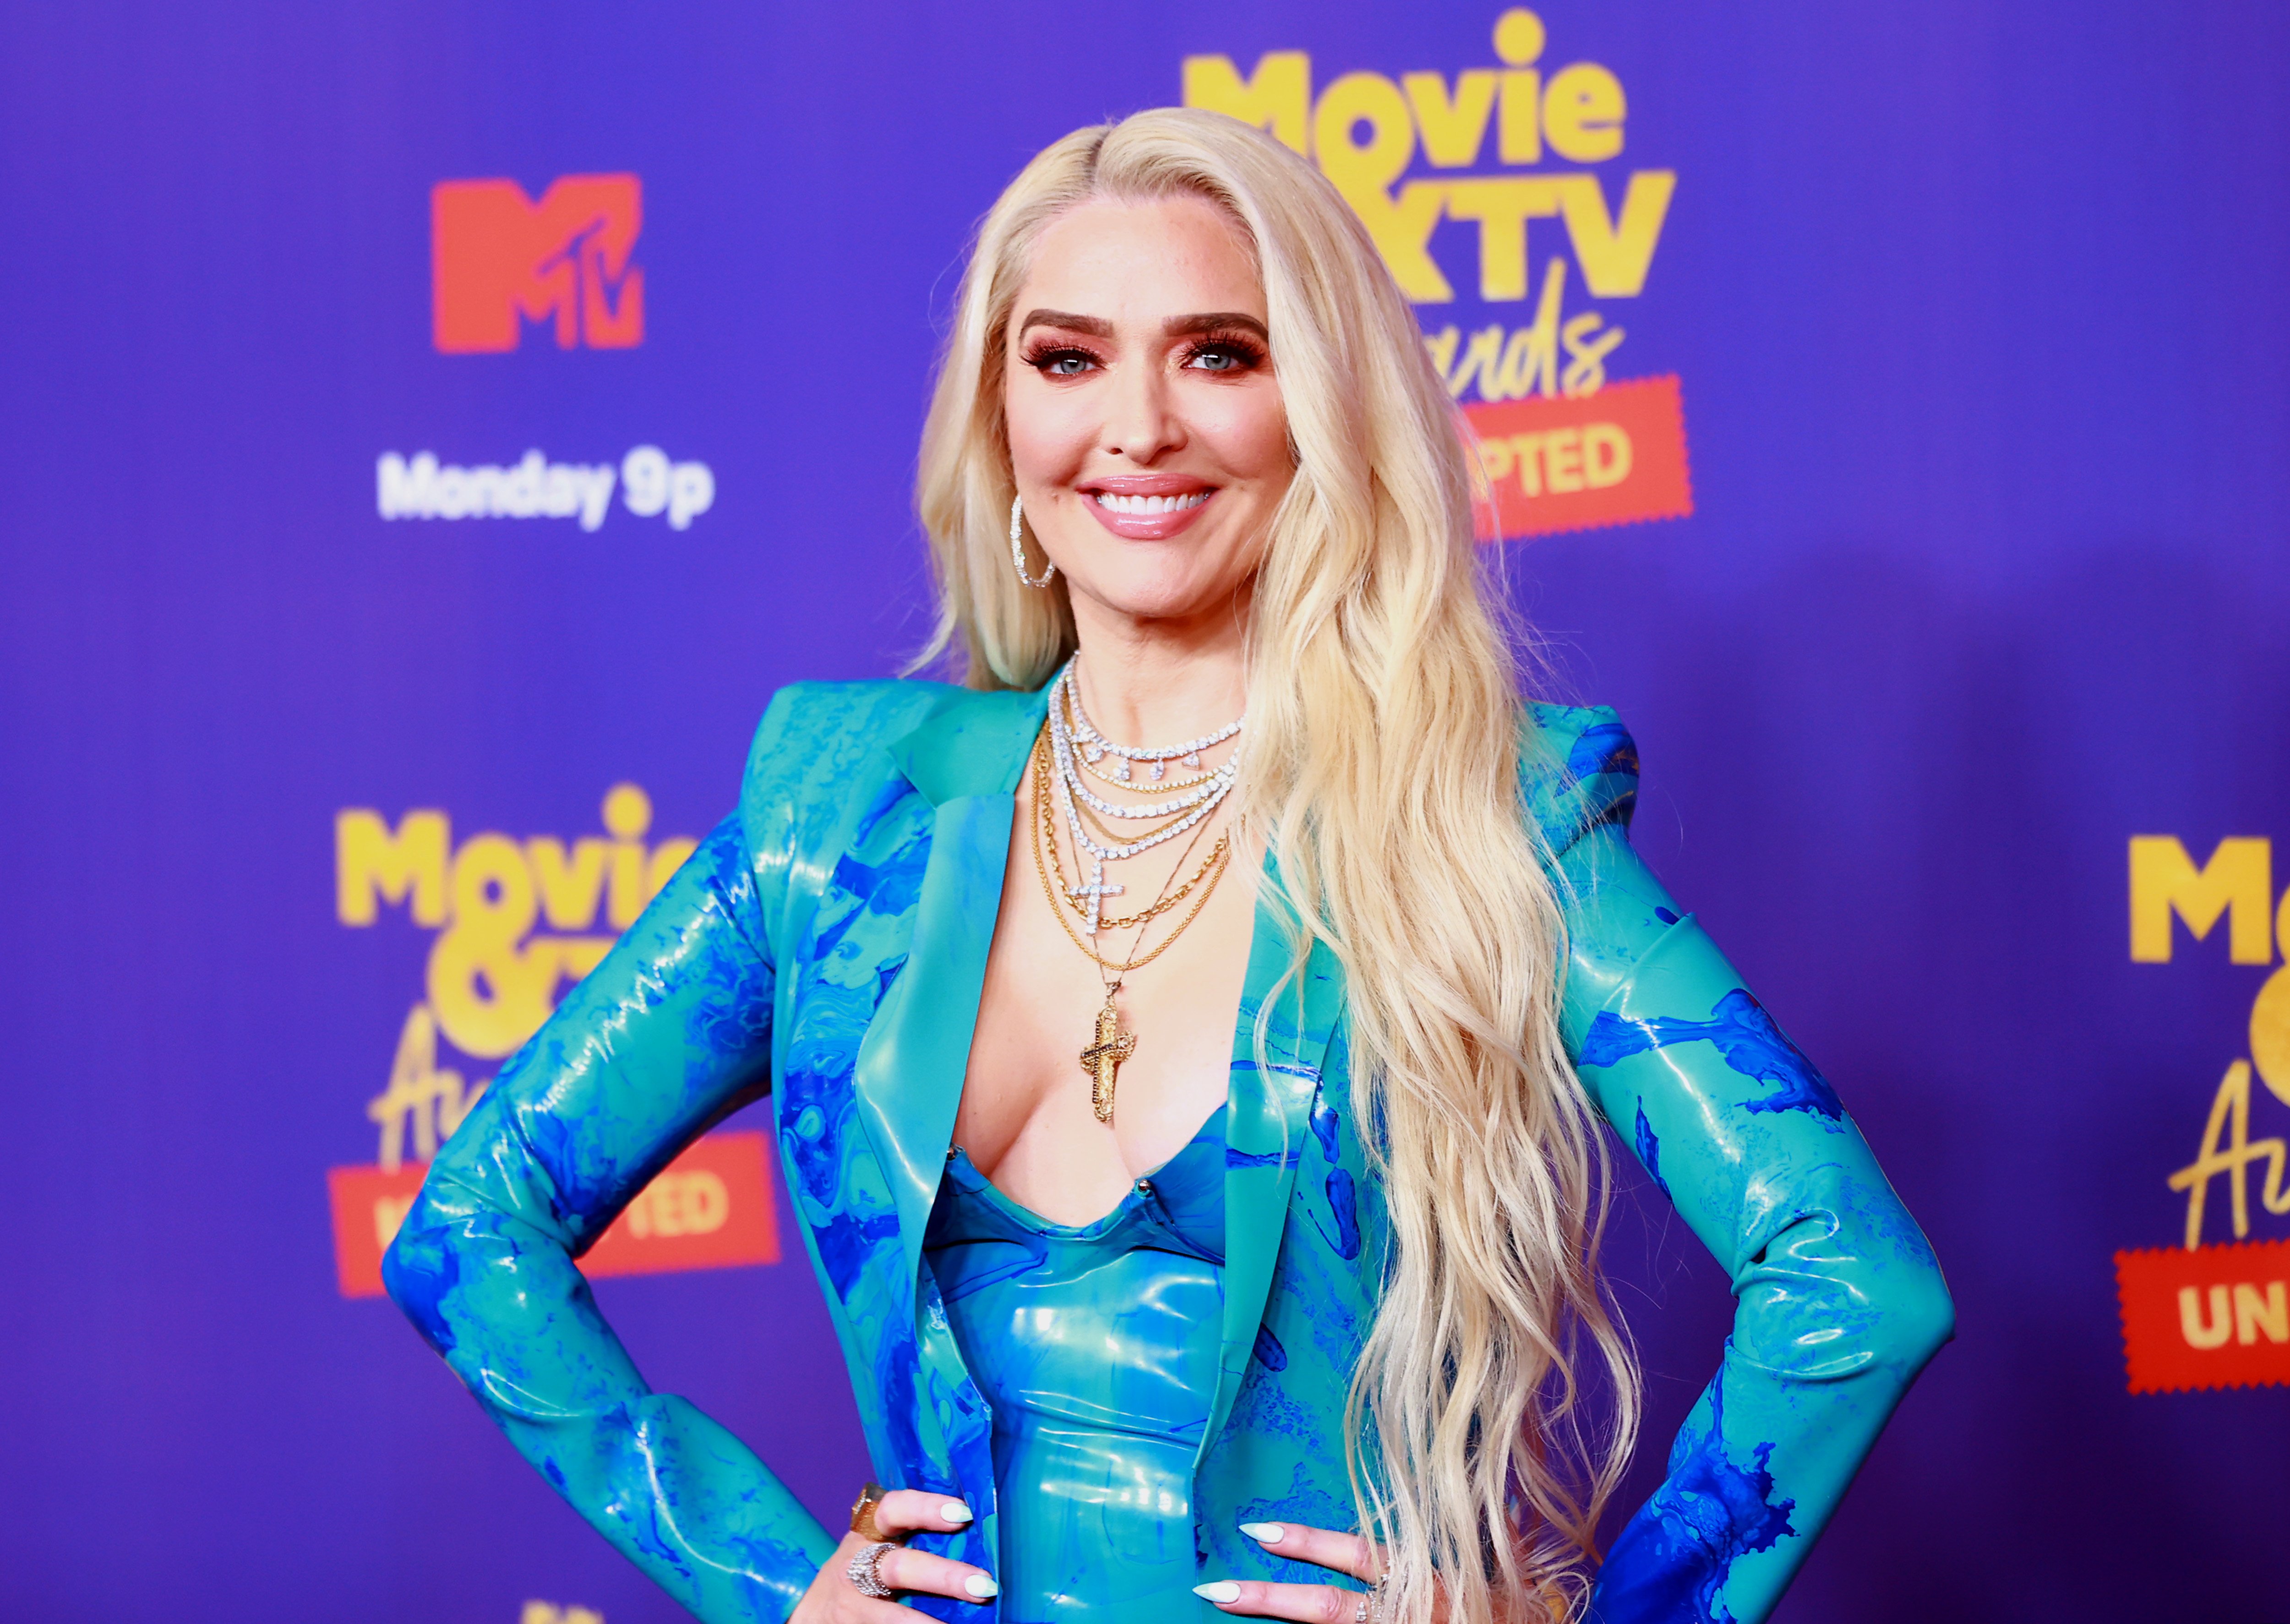 'Real Housewives of Beverly Hills' star Erika Jayne posing for the cameras during the red carpet at the 2021 MTV Movie & TV Awards